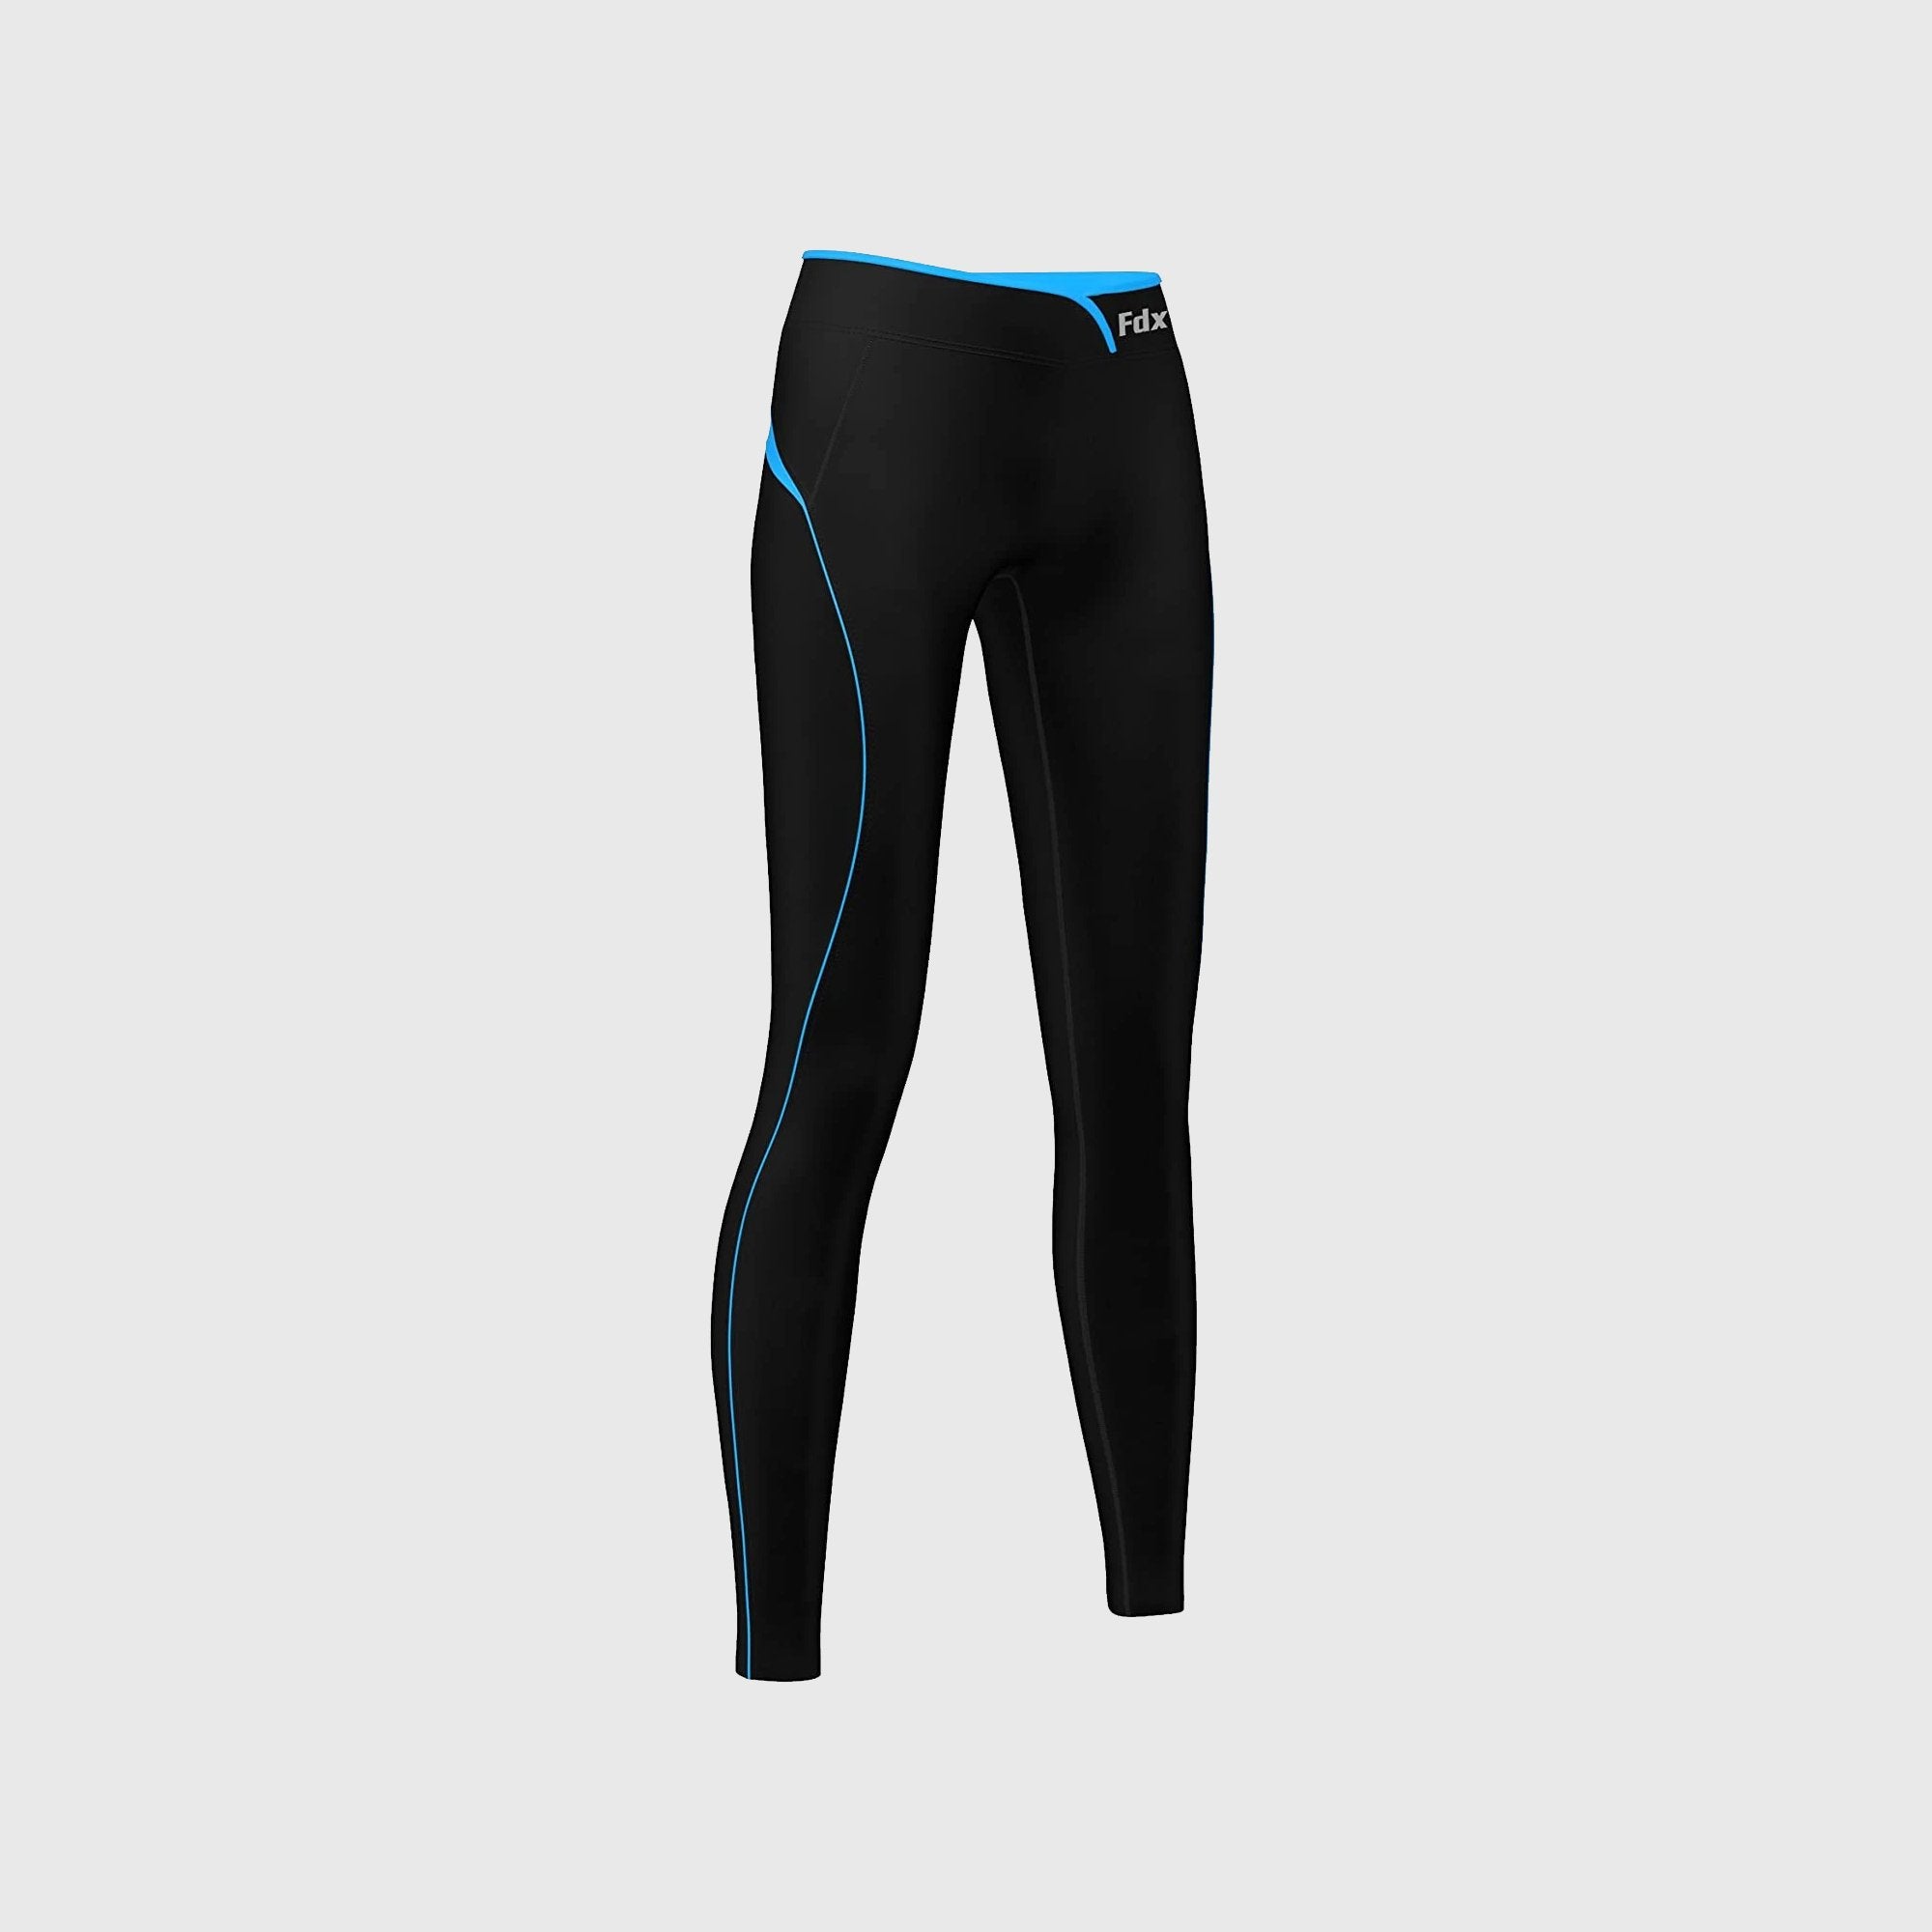 Buy Fdx Women's Workout & Compression Tights